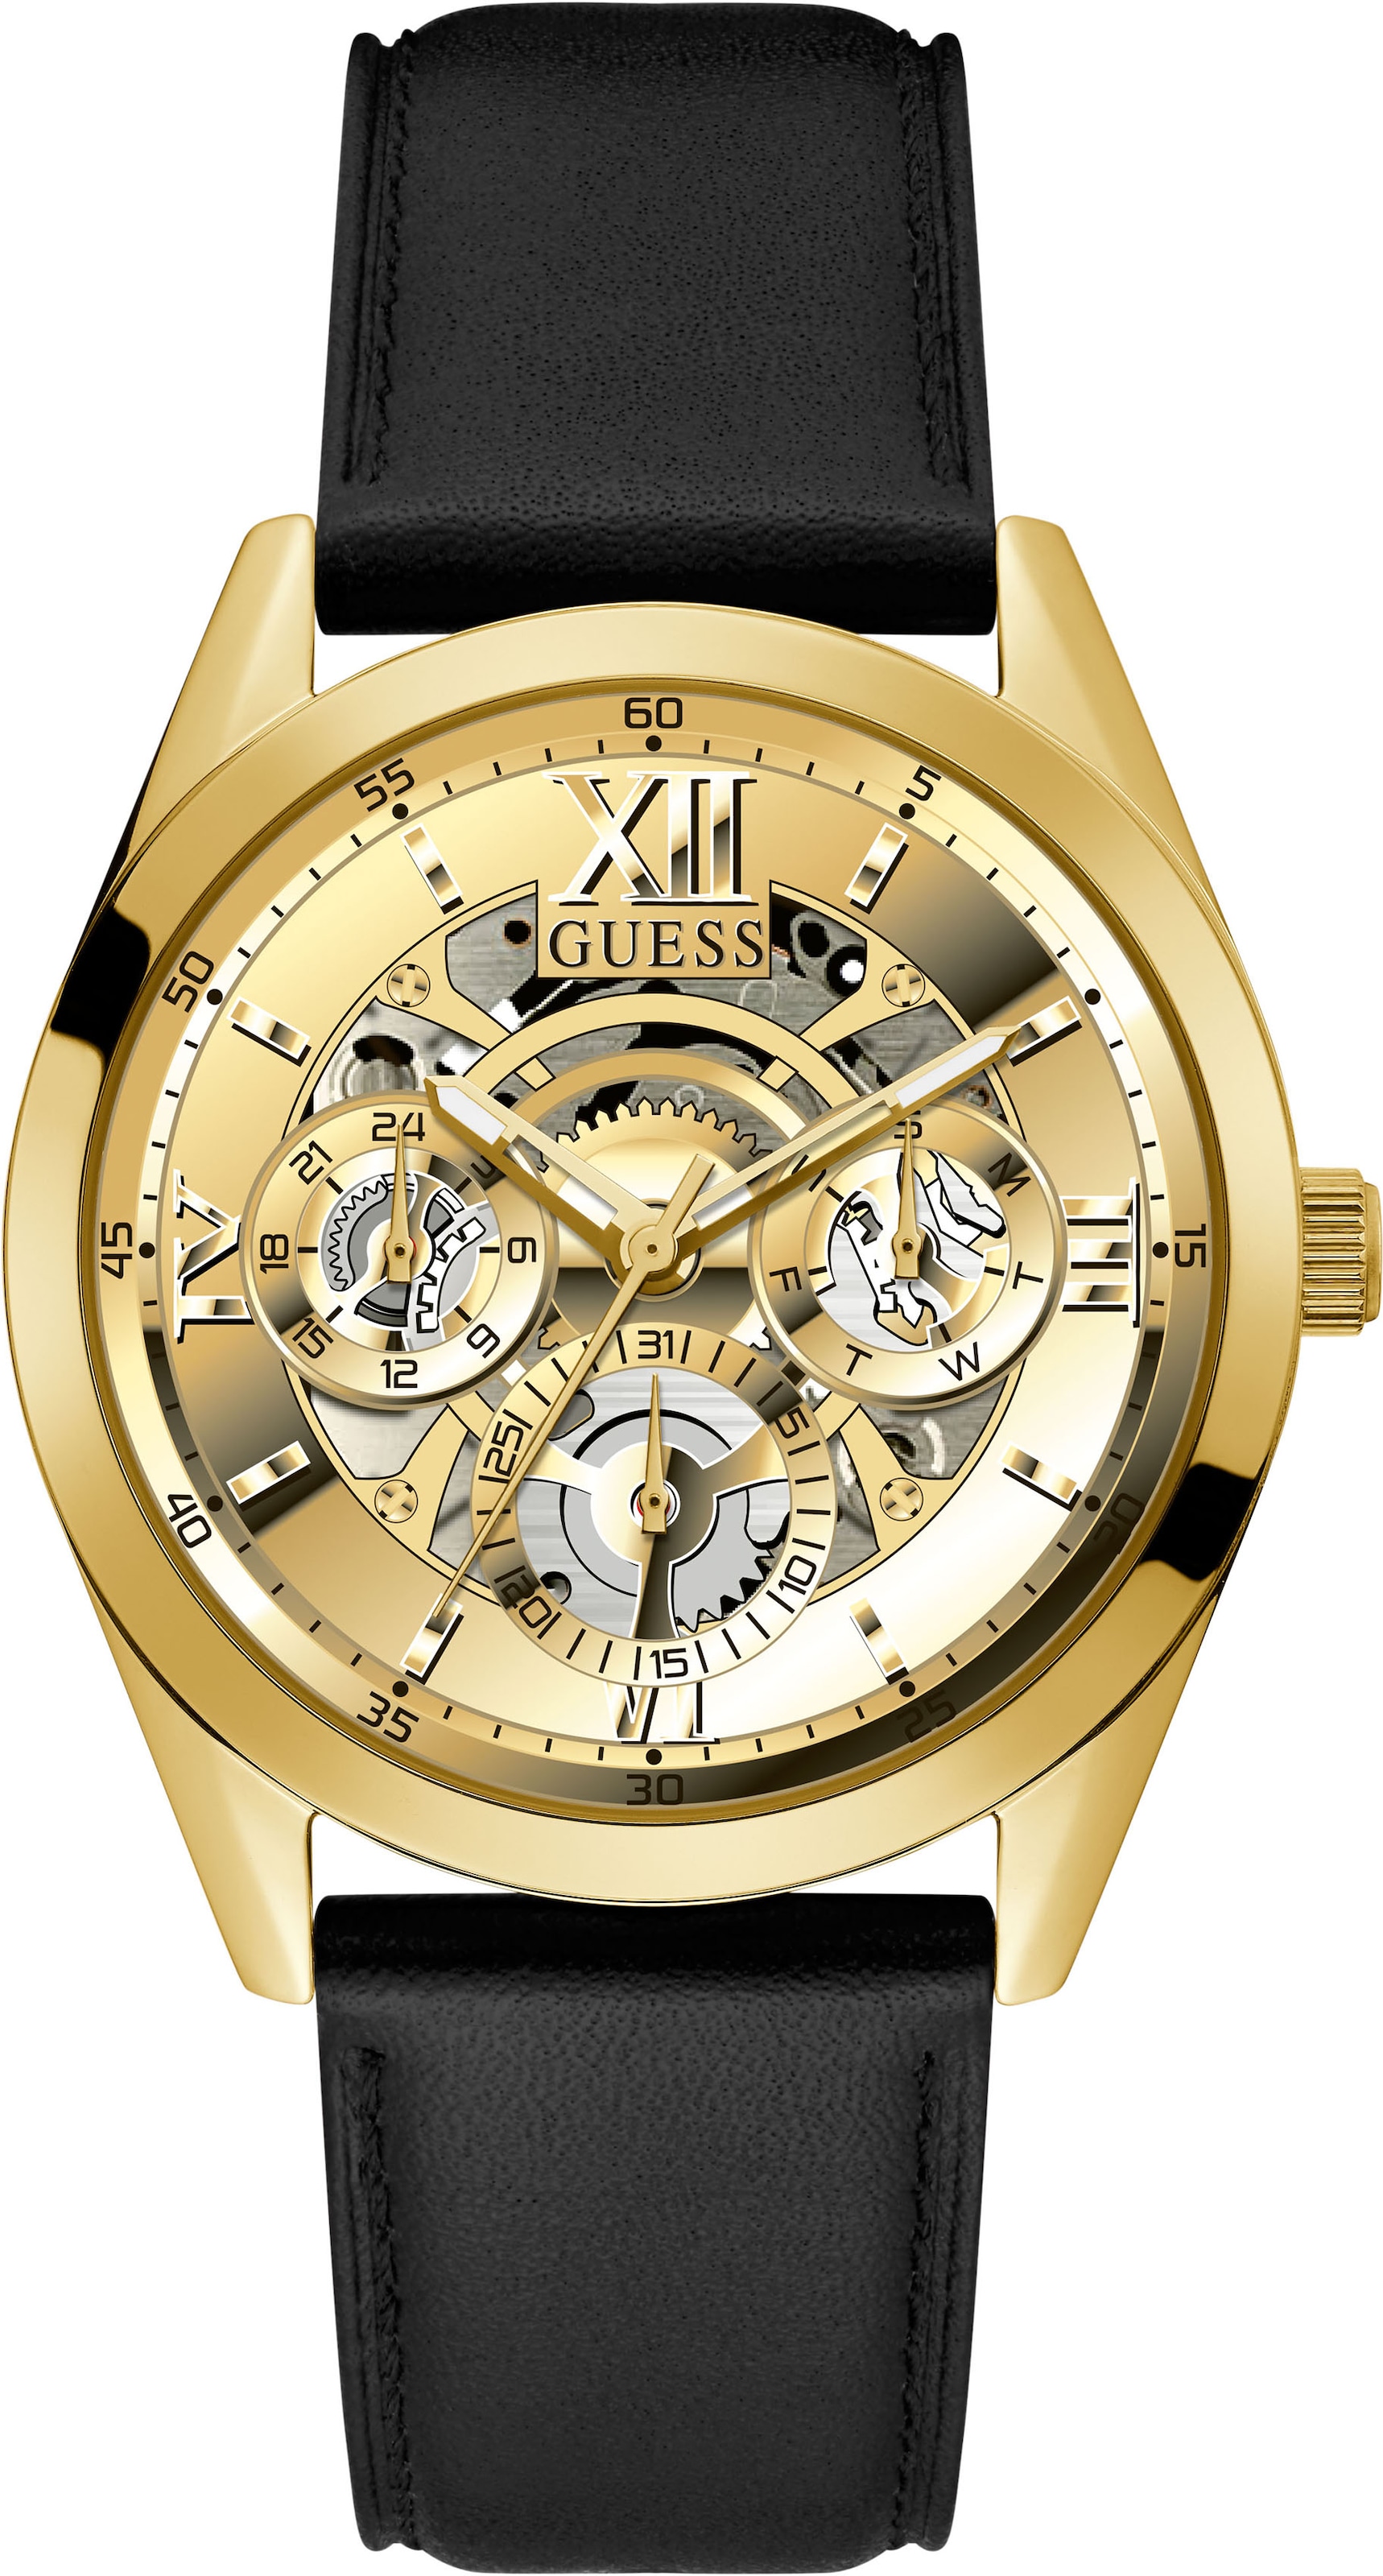 Guess Multifunktionsuhr »TAILOR, GW0389G2« I\'m walking kaufen 